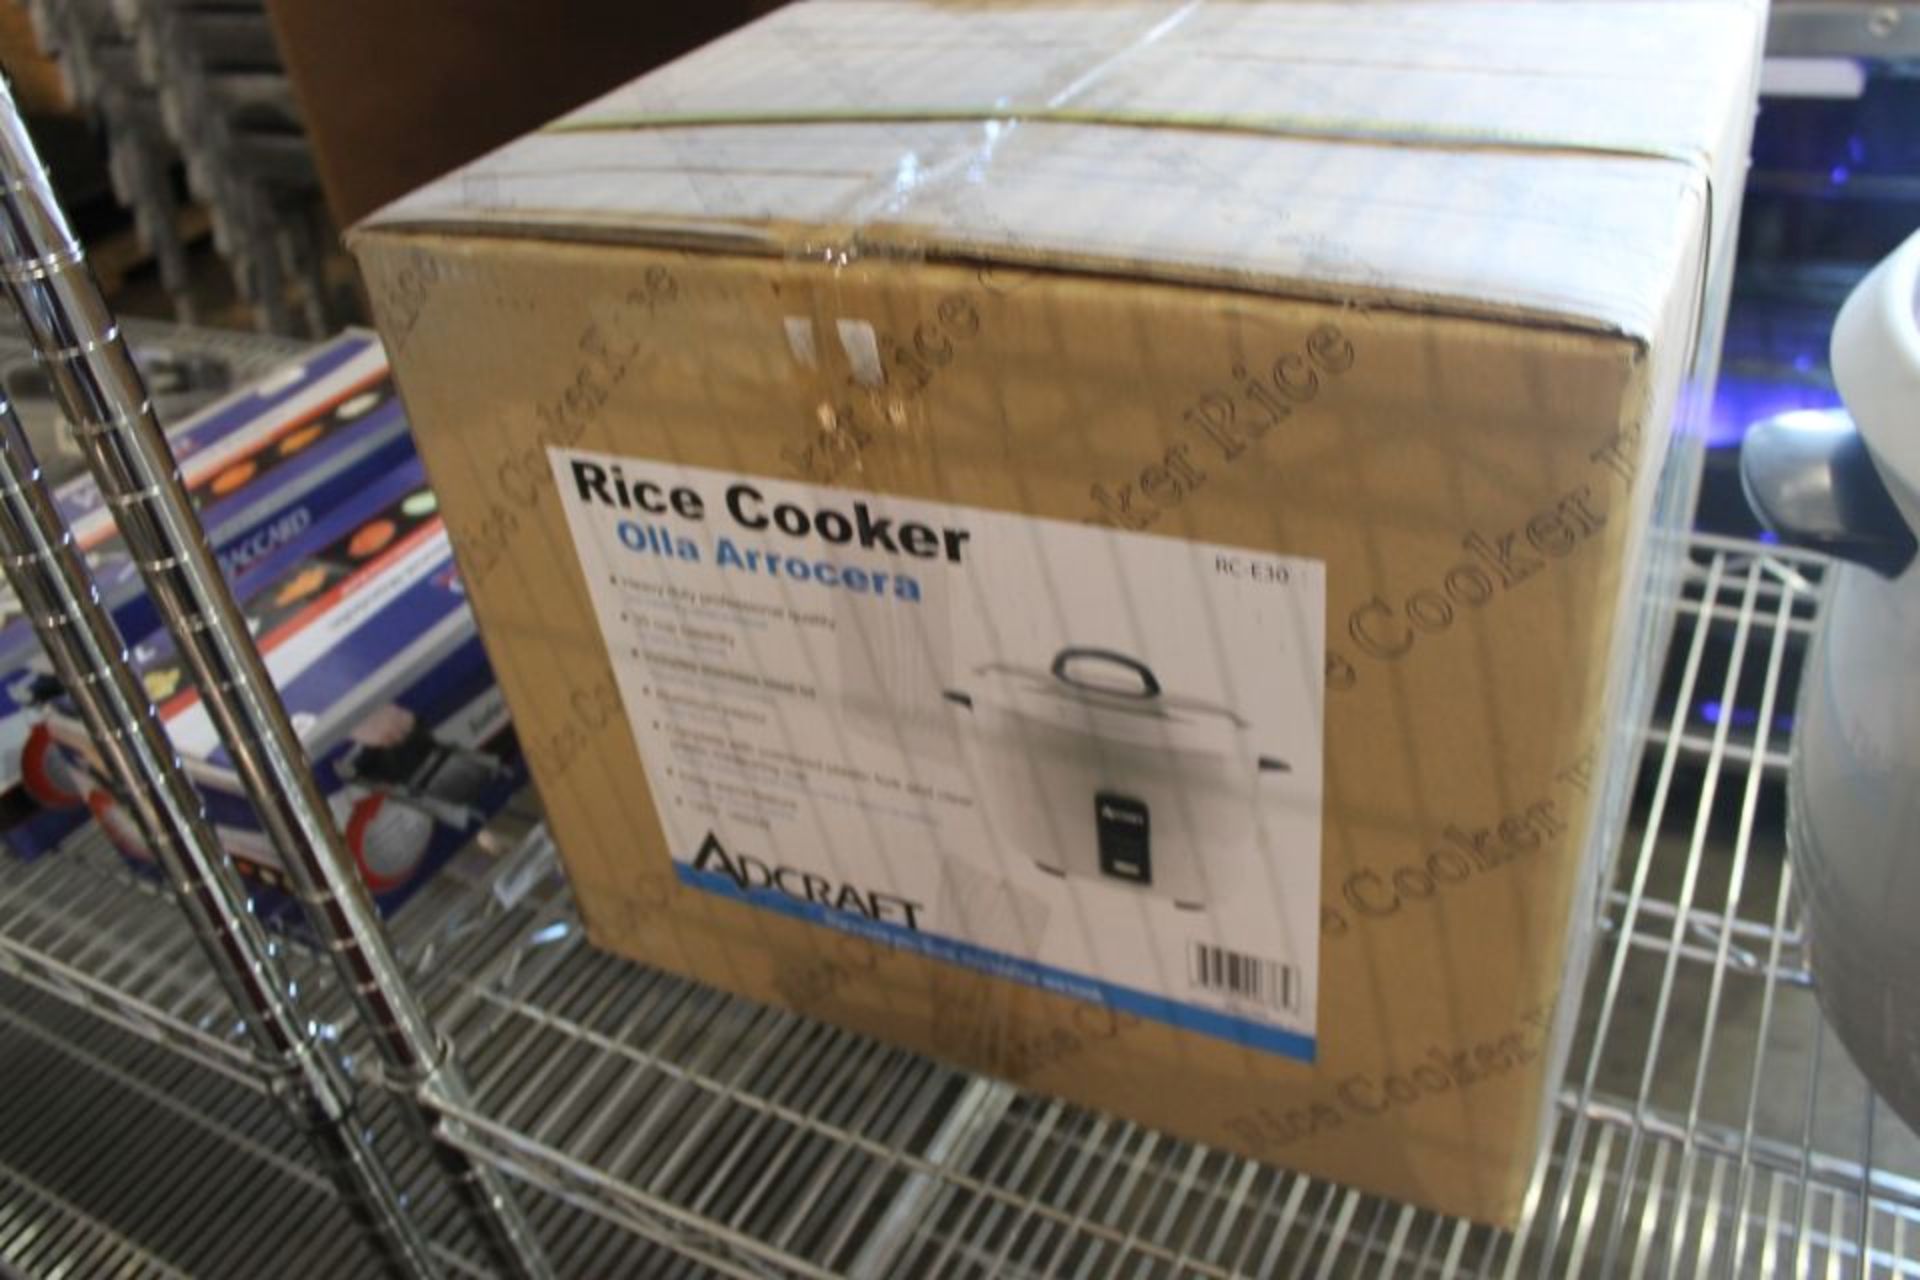 AdCraft 30 cup rice cooker model RC-E30 NEW in box